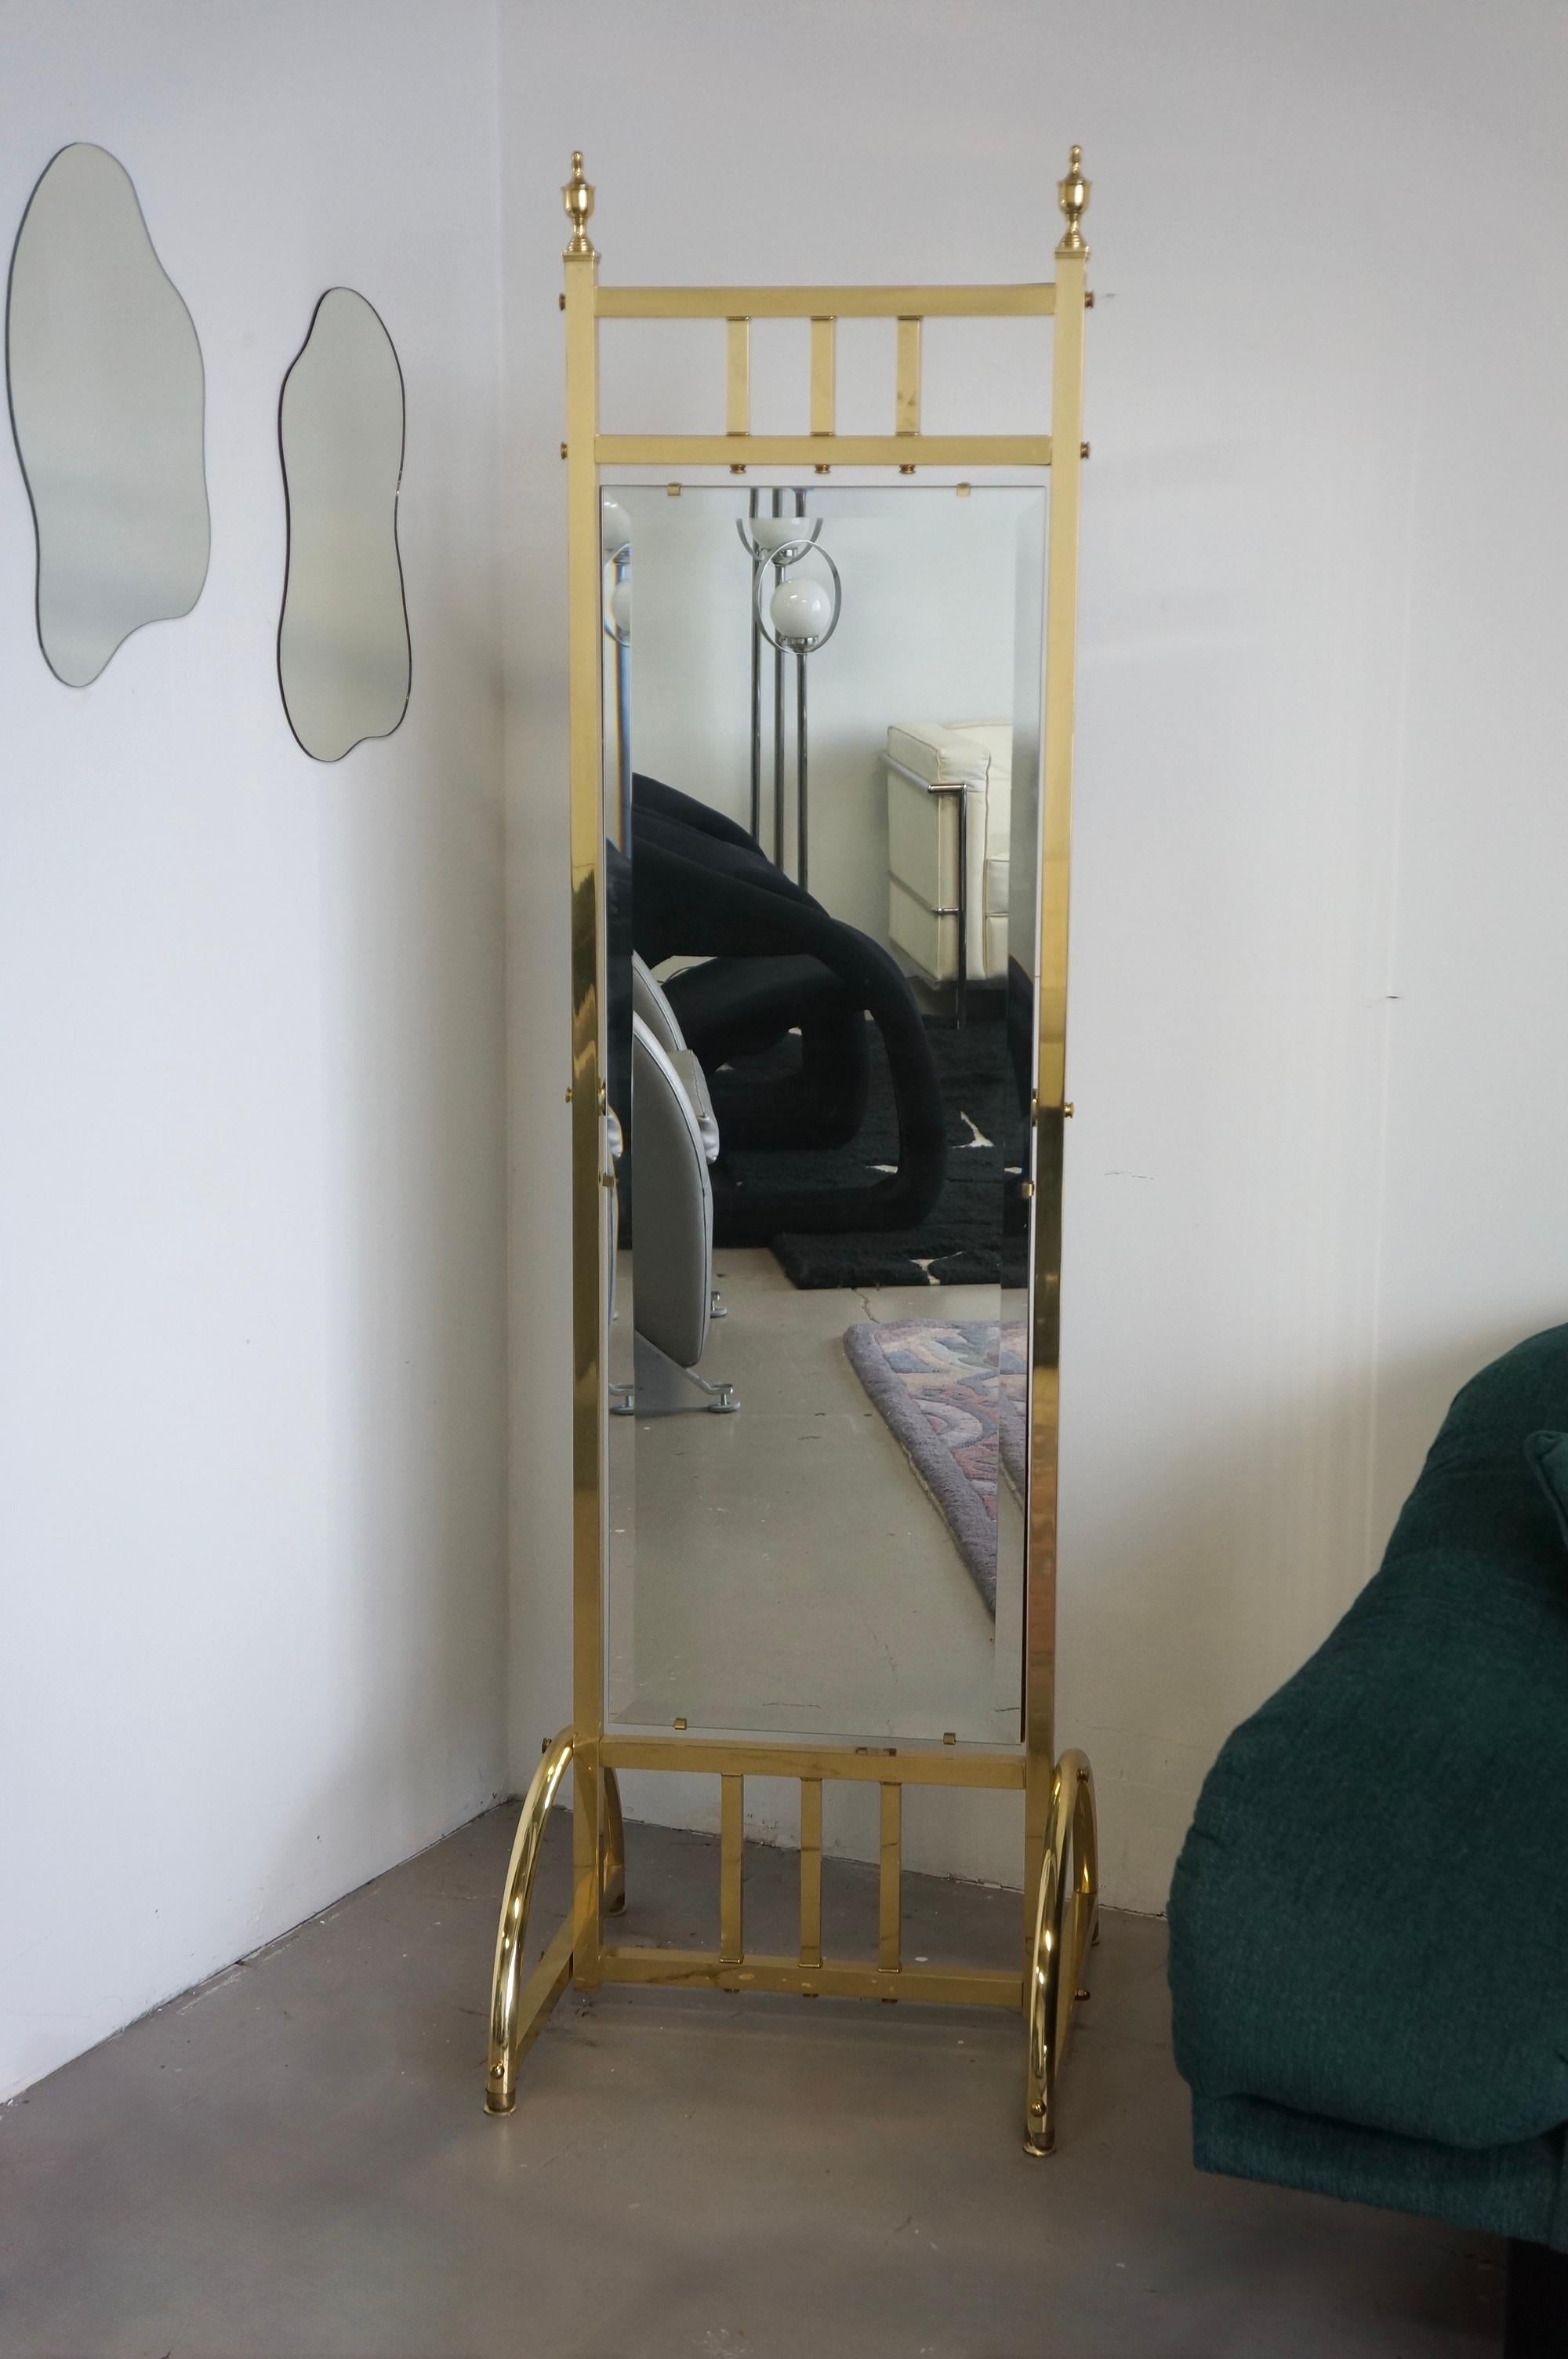 Gorgeous Hollywood regency style brass standing mirror. This mirror has a brass body with a beveled mirror that is held with a wooden backing. There are beautiful detailing throughout such as the crowns on the top corners. The mirror tilts which can